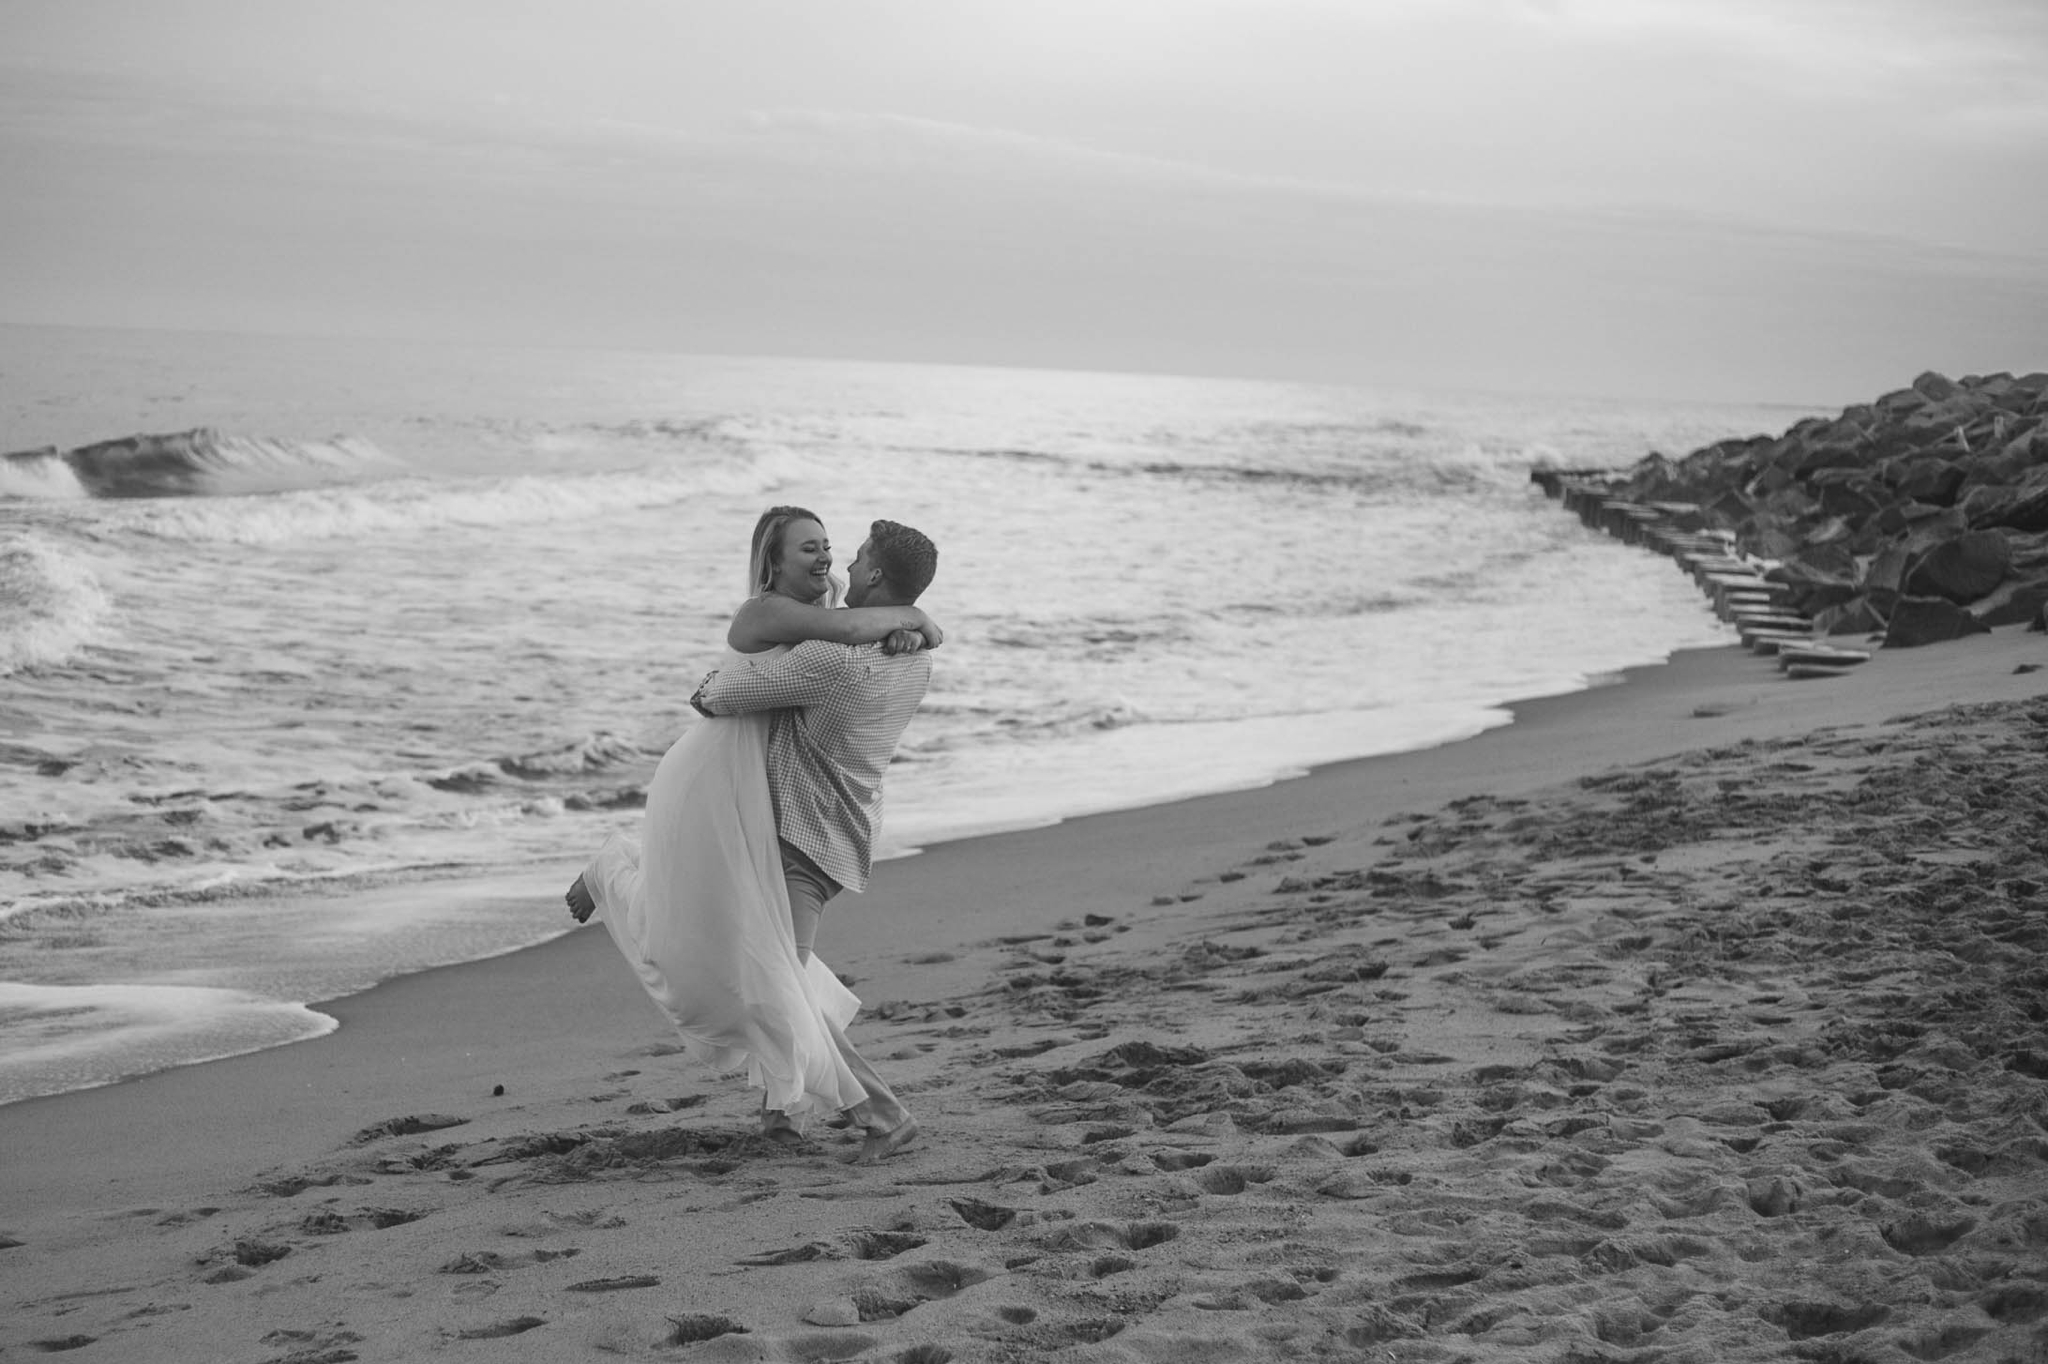  Black and White Romantic Engagement Photography Session at the beach during sunset - guy is kissing his fiance - girl is wearing a white flowy maxi dress from lulus - Honolulu Oahu Hawaii Wedding Photographer - Johanna Dye 